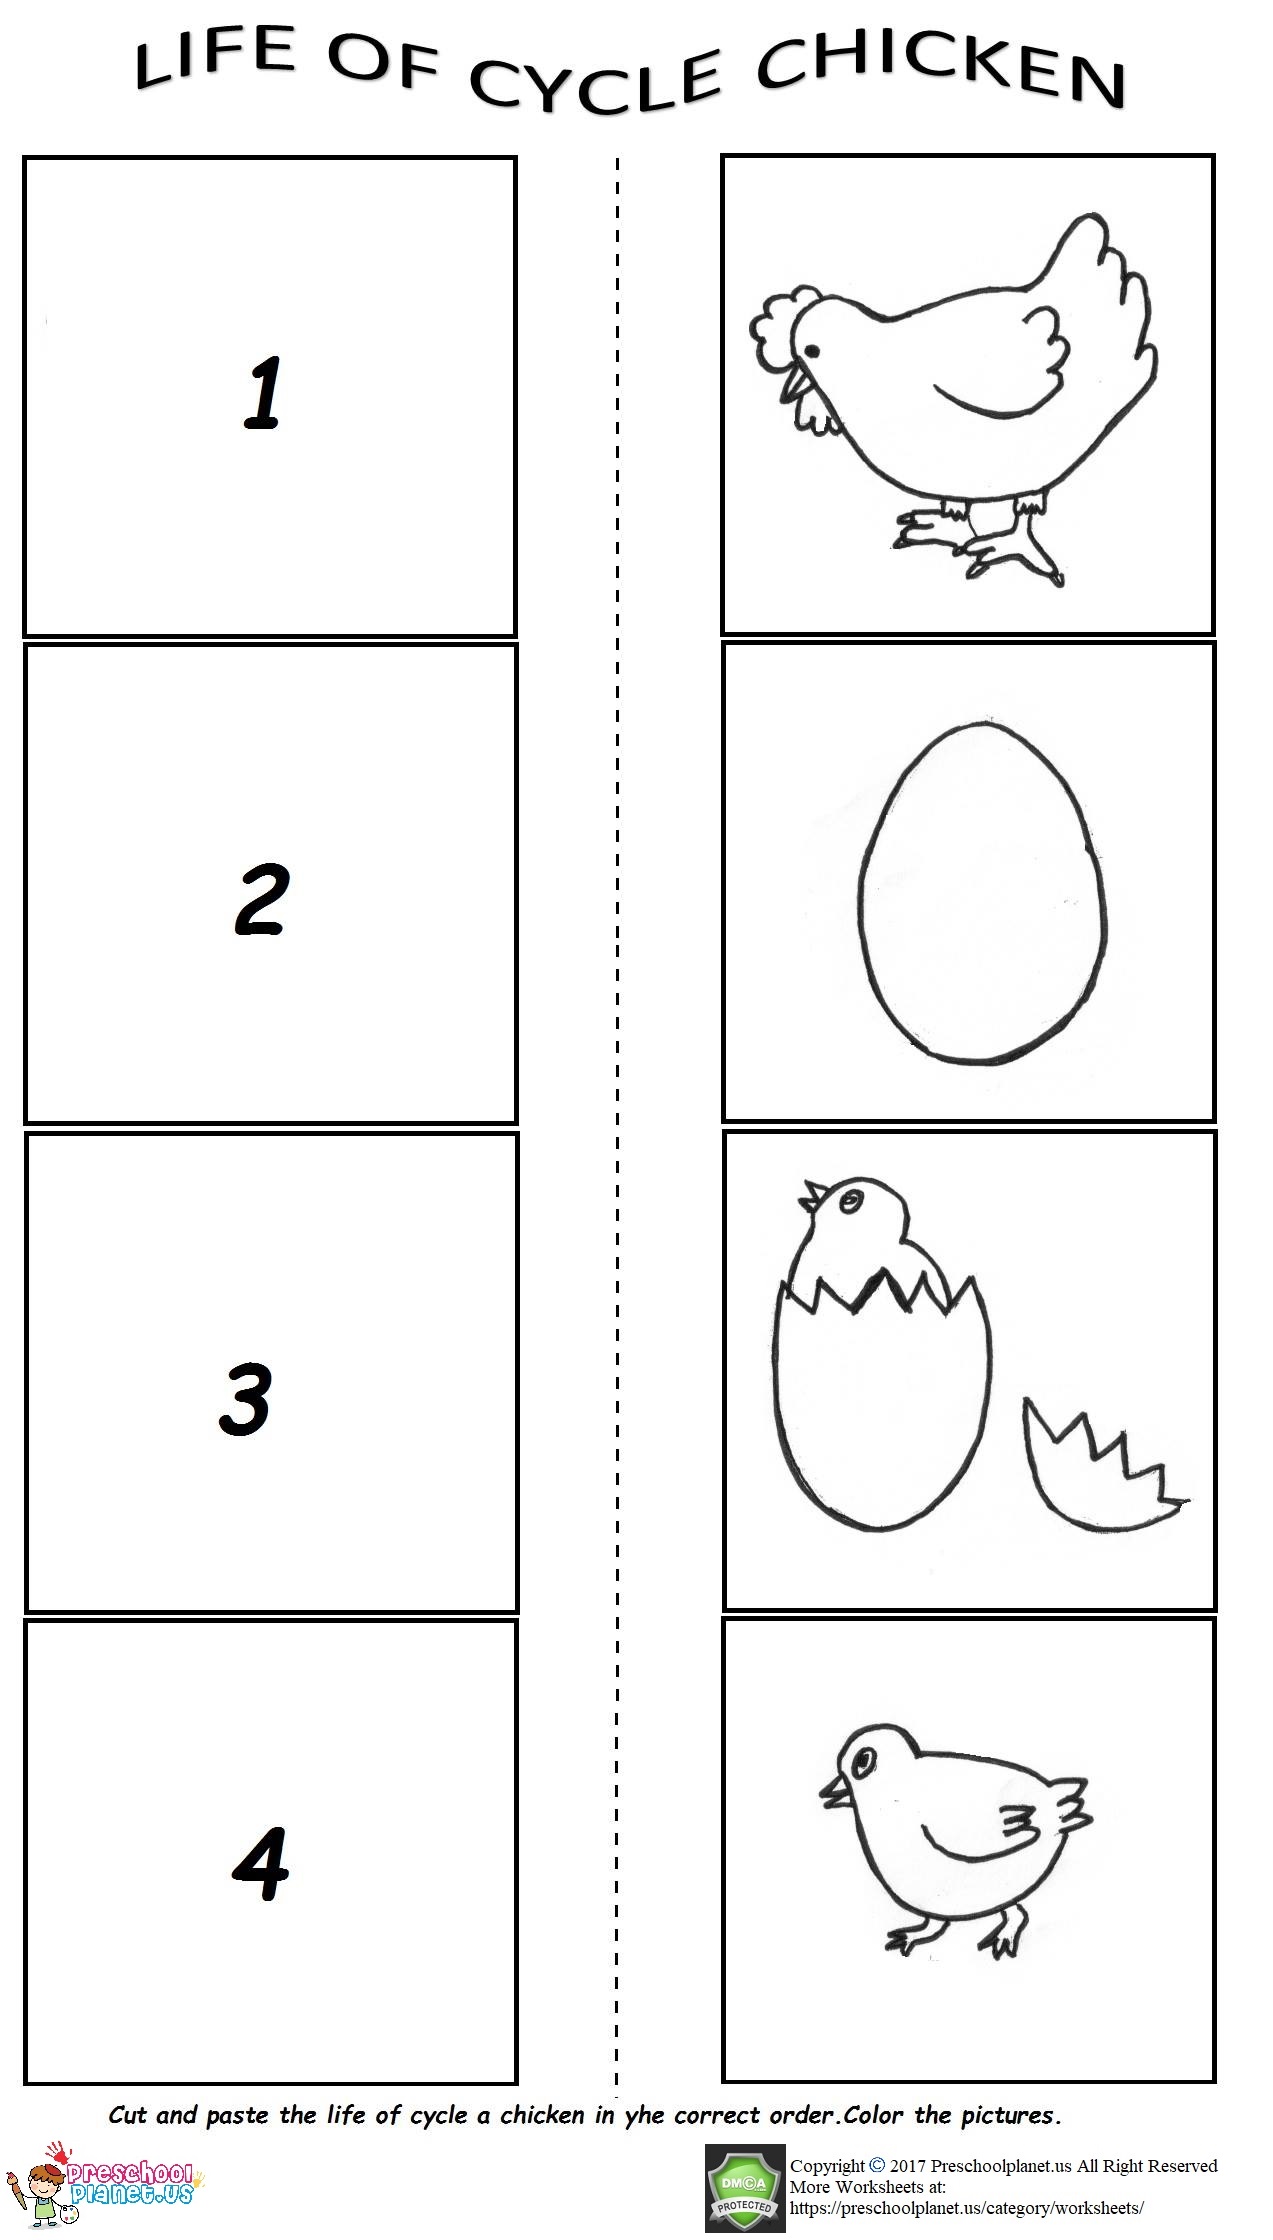 The life cycle of a chicken worksheet â